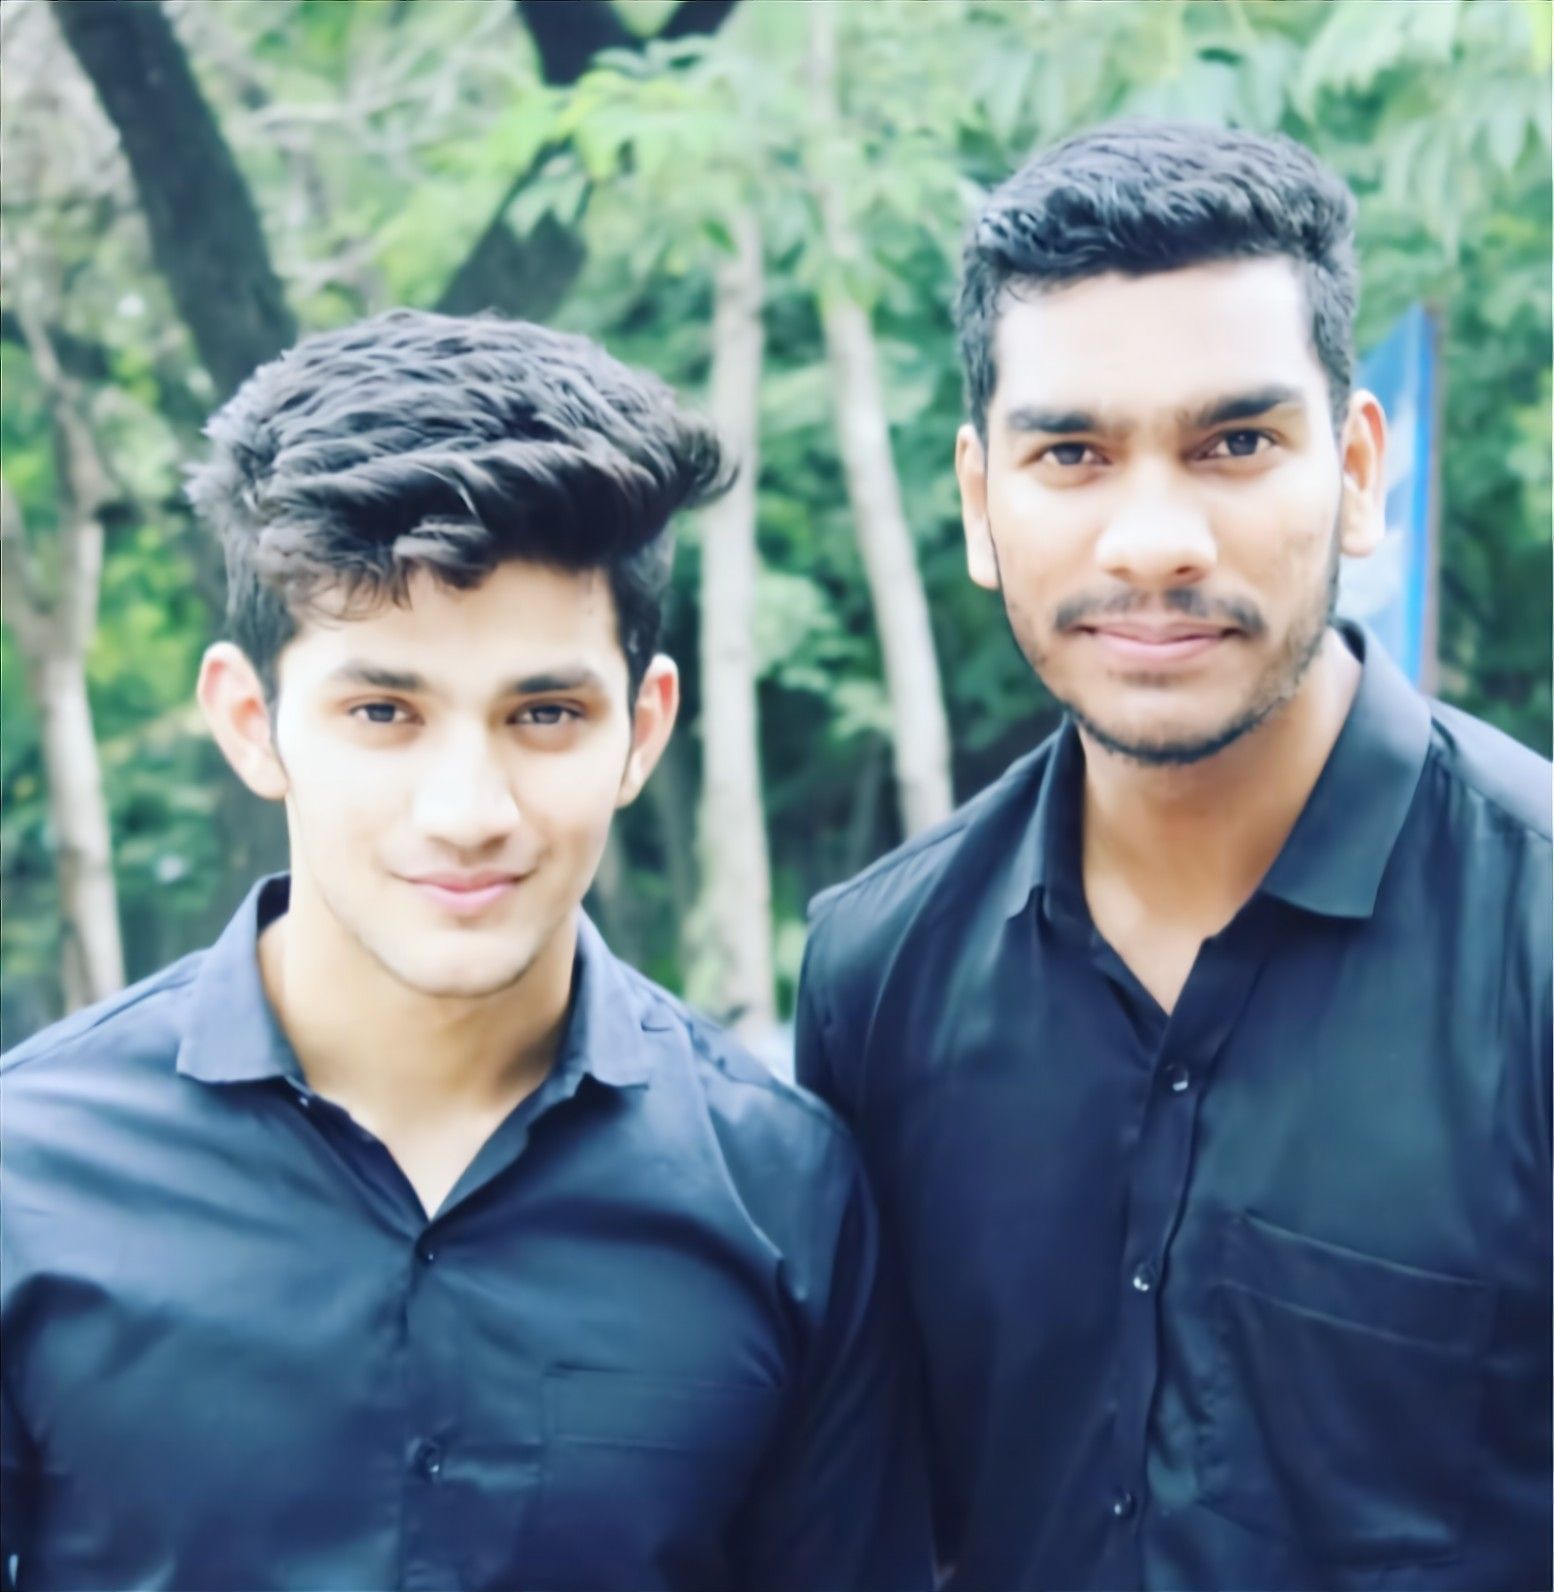 The picture was clicked a few days after Venky got a job with Deloitte, also a few days before his Ranji Trophy debut vs Hyderabad [Credits: Suraj Thakuria]